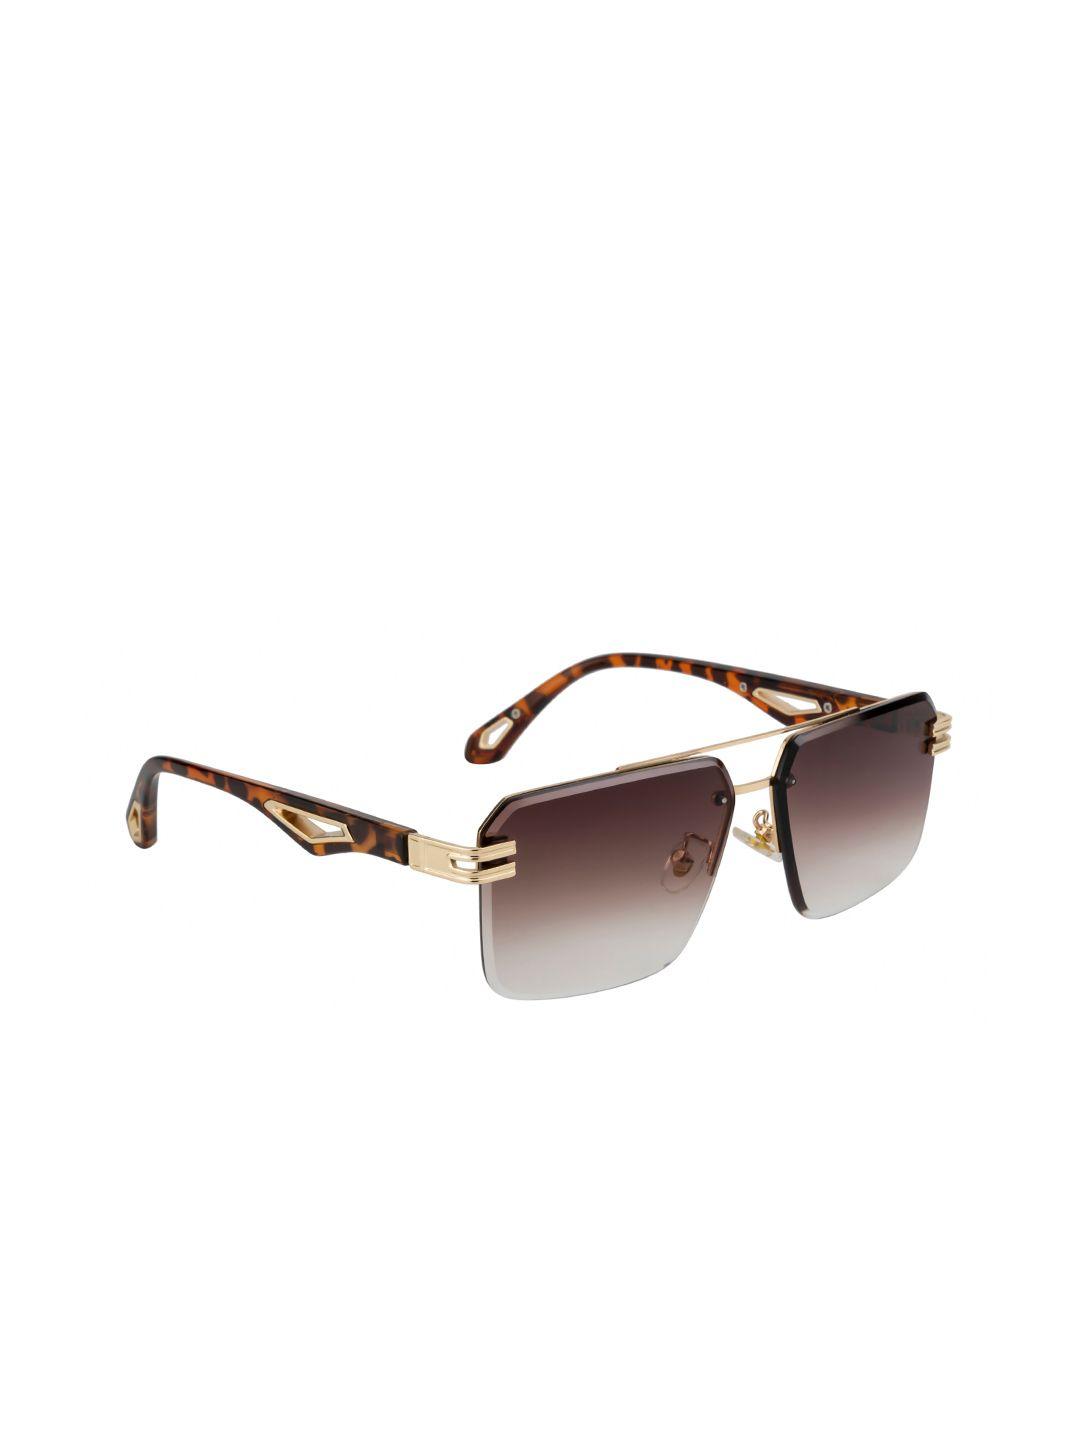 ted smith unisex brown lens & gold-toned aviator sunglasses with uv protected lens